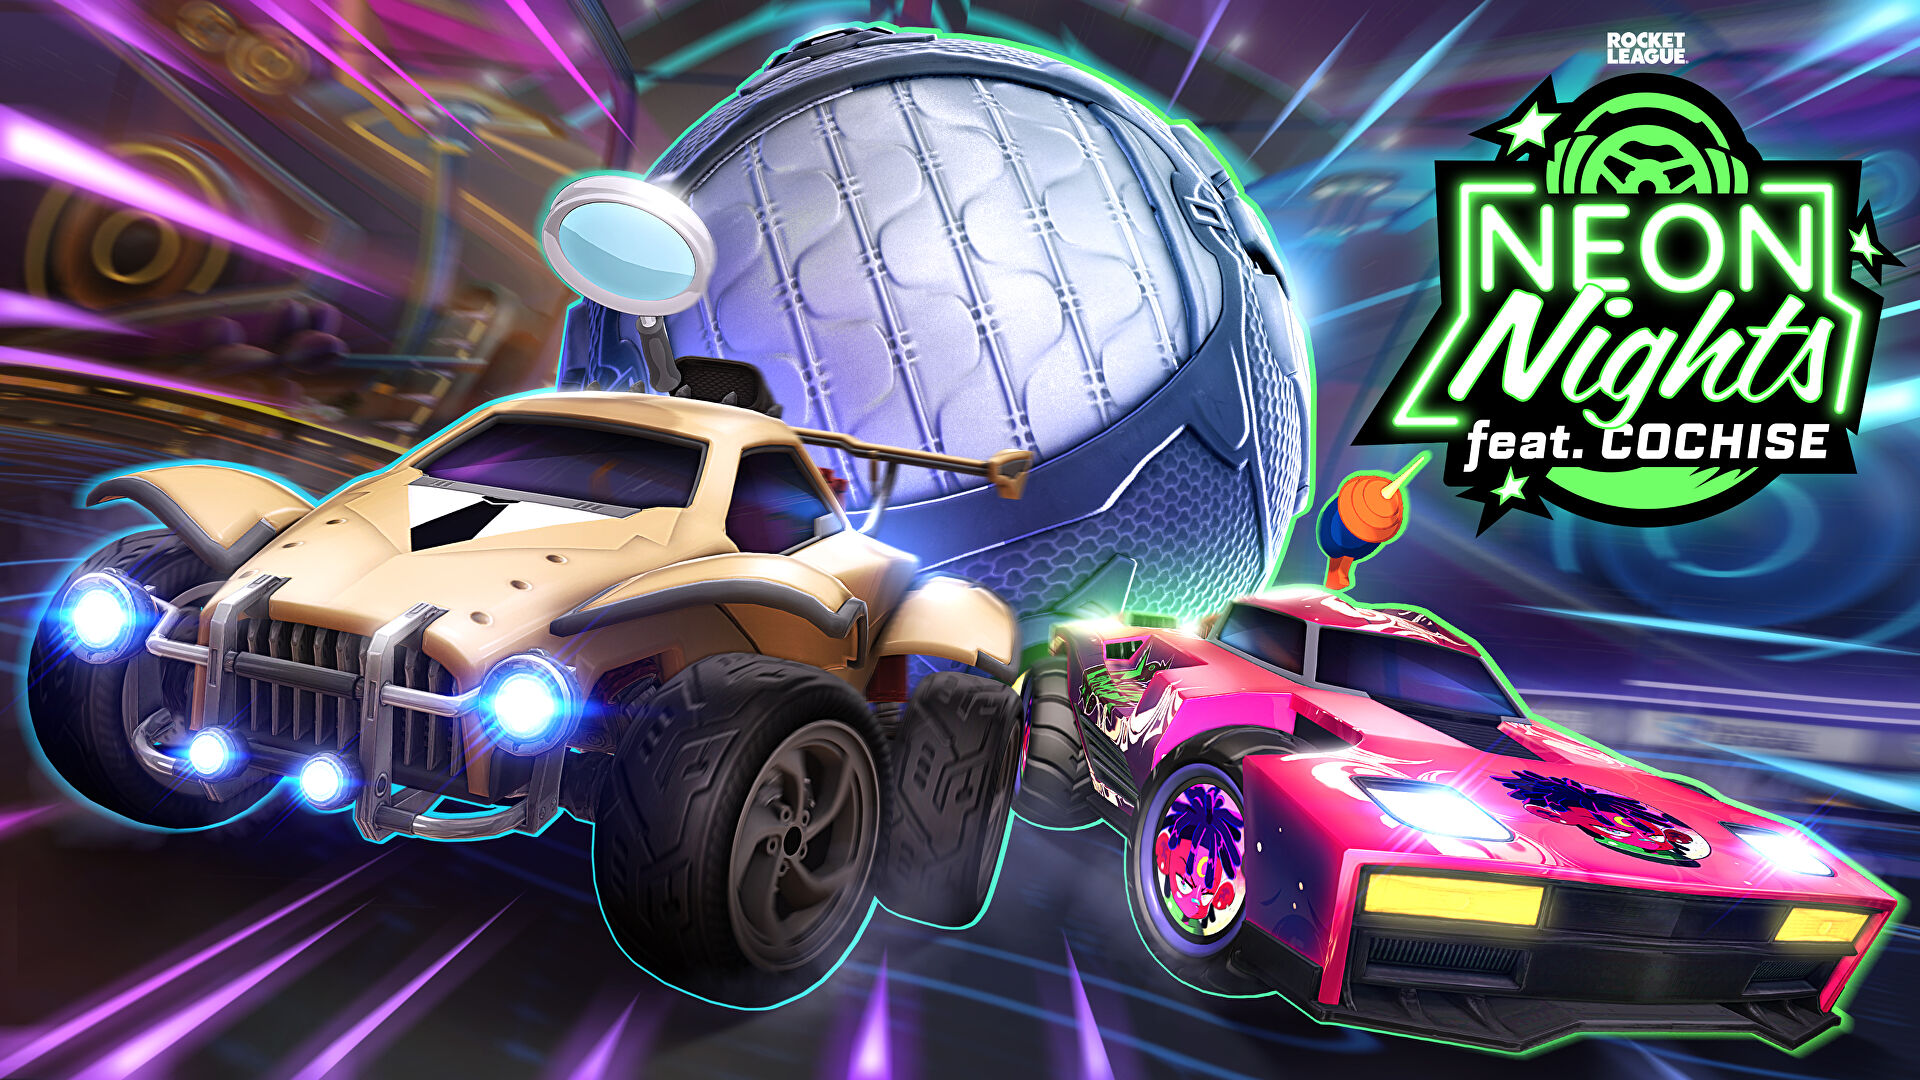 Cochise partners with Rocket League for this month’s Neon Nights event